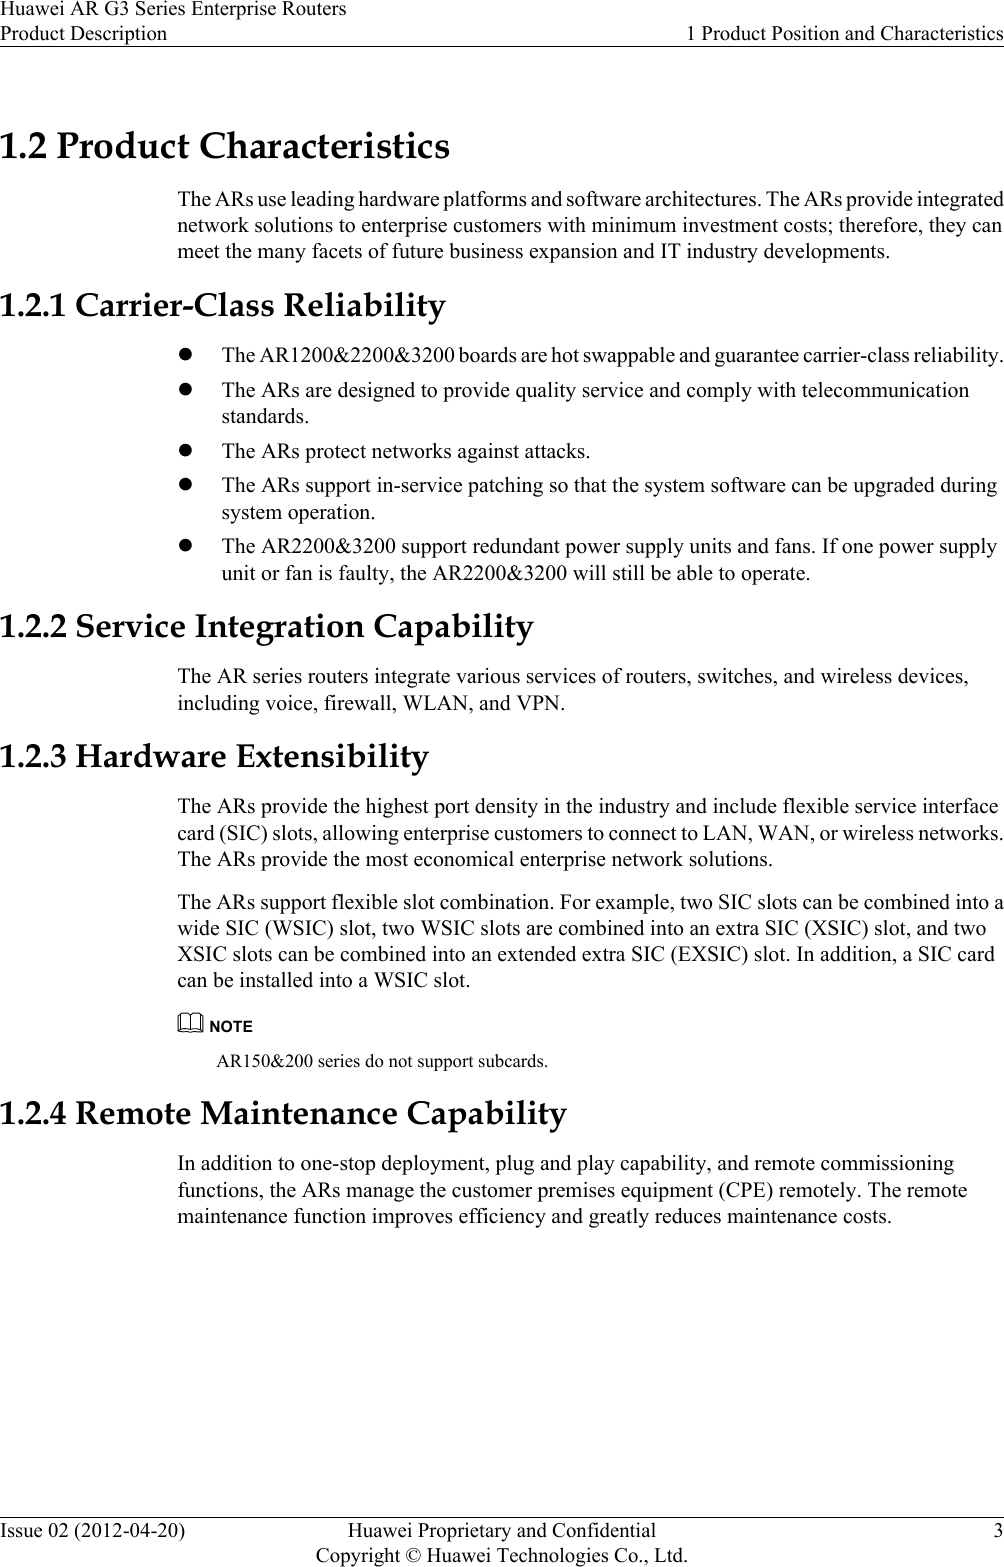 1.2 Product CharacteristicsThe ARs use leading hardware platforms and software architectures. The ARs provide integratednetwork solutions to enterprise customers with minimum investment costs; therefore, they canmeet the many facets of future business expansion and IT industry developments.1.2.1 Carrier-Class ReliabilitylThe AR1200&amp;2200&amp;3200 boards are hot swappable and guarantee carrier-class reliability.lThe ARs are designed to provide quality service and comply with telecommunicationstandards.lThe ARs protect networks against attacks.lThe ARs support in-service patching so that the system software can be upgraded duringsystem operation.lThe AR2200&amp;3200 support redundant power supply units and fans. If one power supplyunit or fan is faulty, the AR2200&amp;3200 will still be able to operate.1.2.2 Service Integration CapabilityThe AR series routers integrate various services of routers, switches, and wireless devices,including voice, firewall, WLAN, and VPN.1.2.3 Hardware ExtensibilityThe ARs provide the highest port density in the industry and include flexible service interfacecard (SIC) slots, allowing enterprise customers to connect to LAN, WAN, or wireless networks.The ARs provide the most economical enterprise network solutions.The ARs support flexible slot combination. For example, two SIC slots can be combined into awide SIC (WSIC) slot, two WSIC slots are combined into an extra SIC (XSIC) slot, and twoXSIC slots can be combined into an extended extra SIC (EXSIC) slot. In addition, a SIC cardcan be installed into a WSIC slot.NOTEAR150&amp;200 series do not support subcards.1.2.4 Remote Maintenance CapabilityIn addition to one-stop deployment, plug and play capability, and remote commissioningfunctions, the ARs manage the customer premises equipment (CPE) remotely. The remotemaintenance function improves efficiency and greatly reduces maintenance costs.Huawei AR G3 Series Enterprise RoutersProduct Description 1 Product Position and CharacteristicsIssue 02 (2012-04-20) Huawei Proprietary and ConfidentialCopyright © Huawei Technologies Co., Ltd.3